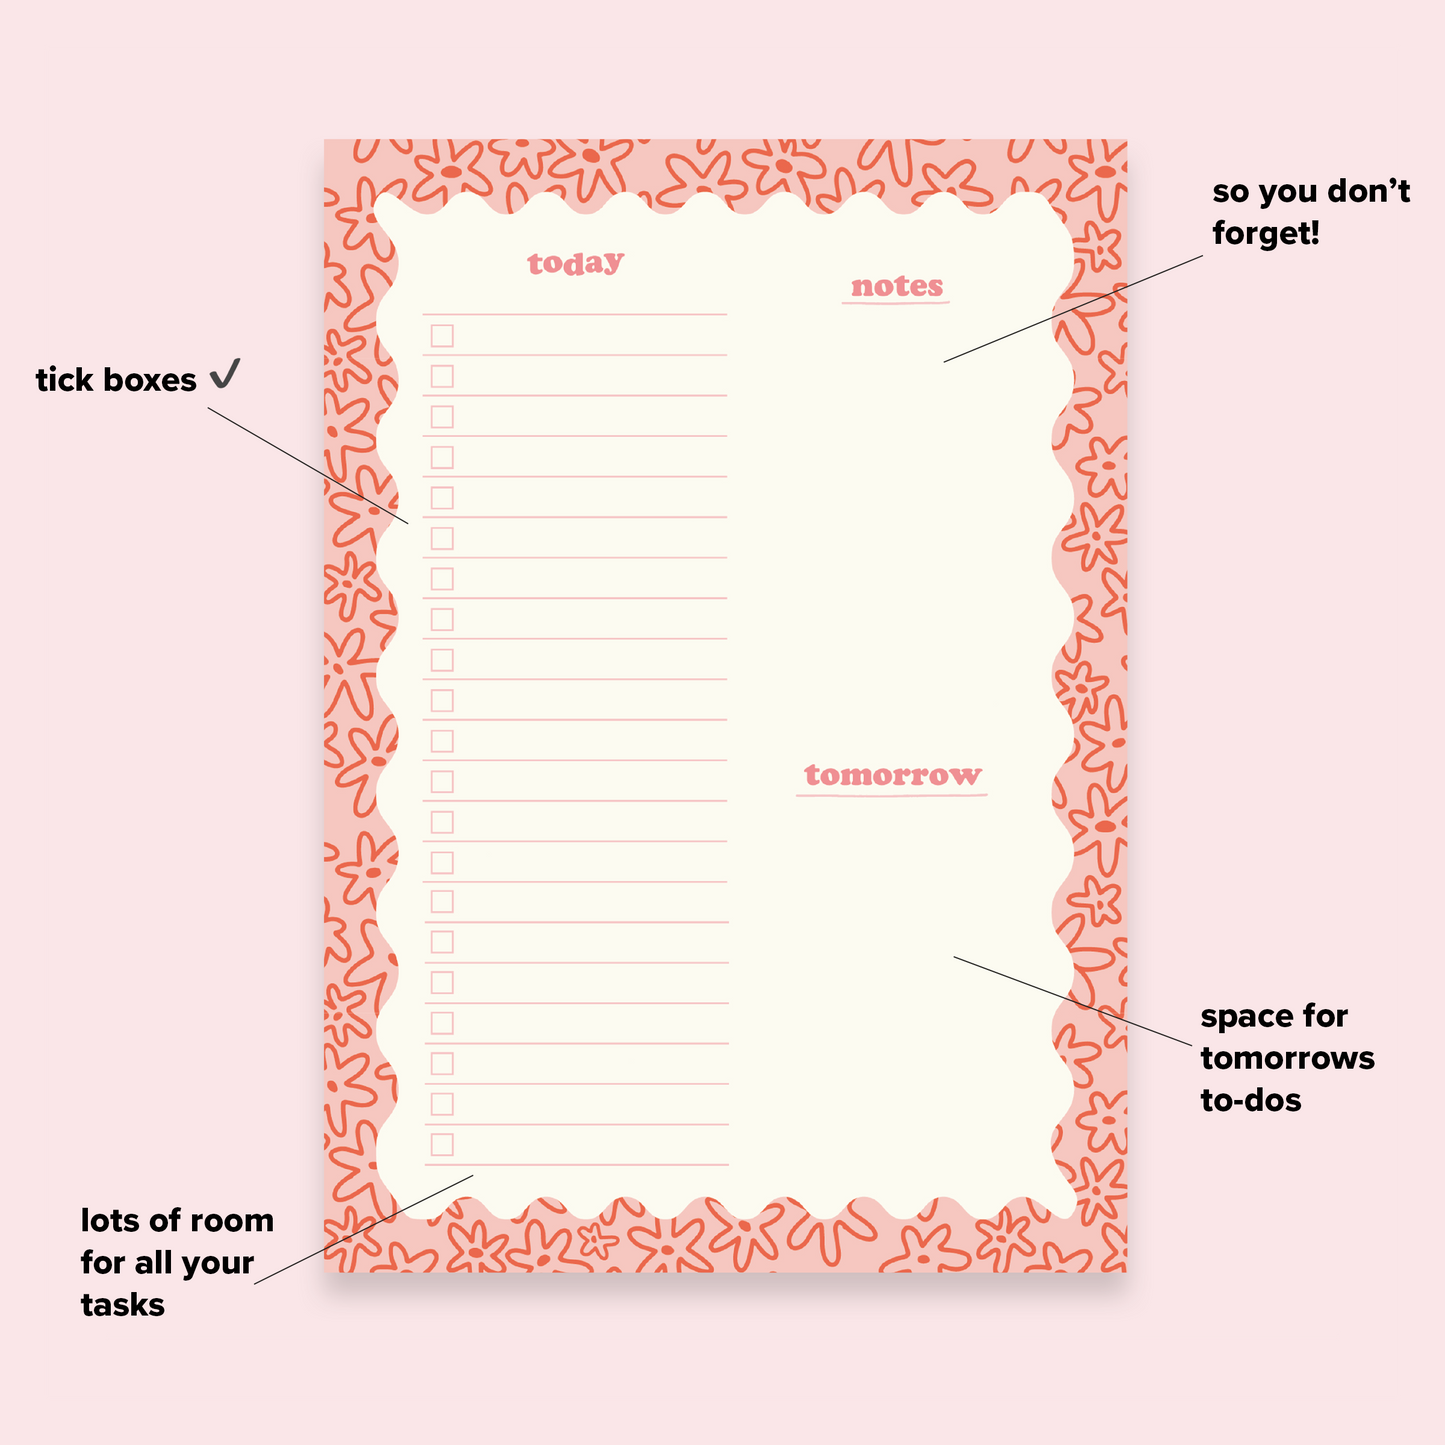 A daily desk planner with a pink wavy border, the border is filled with a doodle floral pattern. This image is annotated to show the features of the desk pad. Including tick boxes, a notes section so you don't forget anything, a space for tomorrows to-dos and a long to-do list with room for all your tasks.